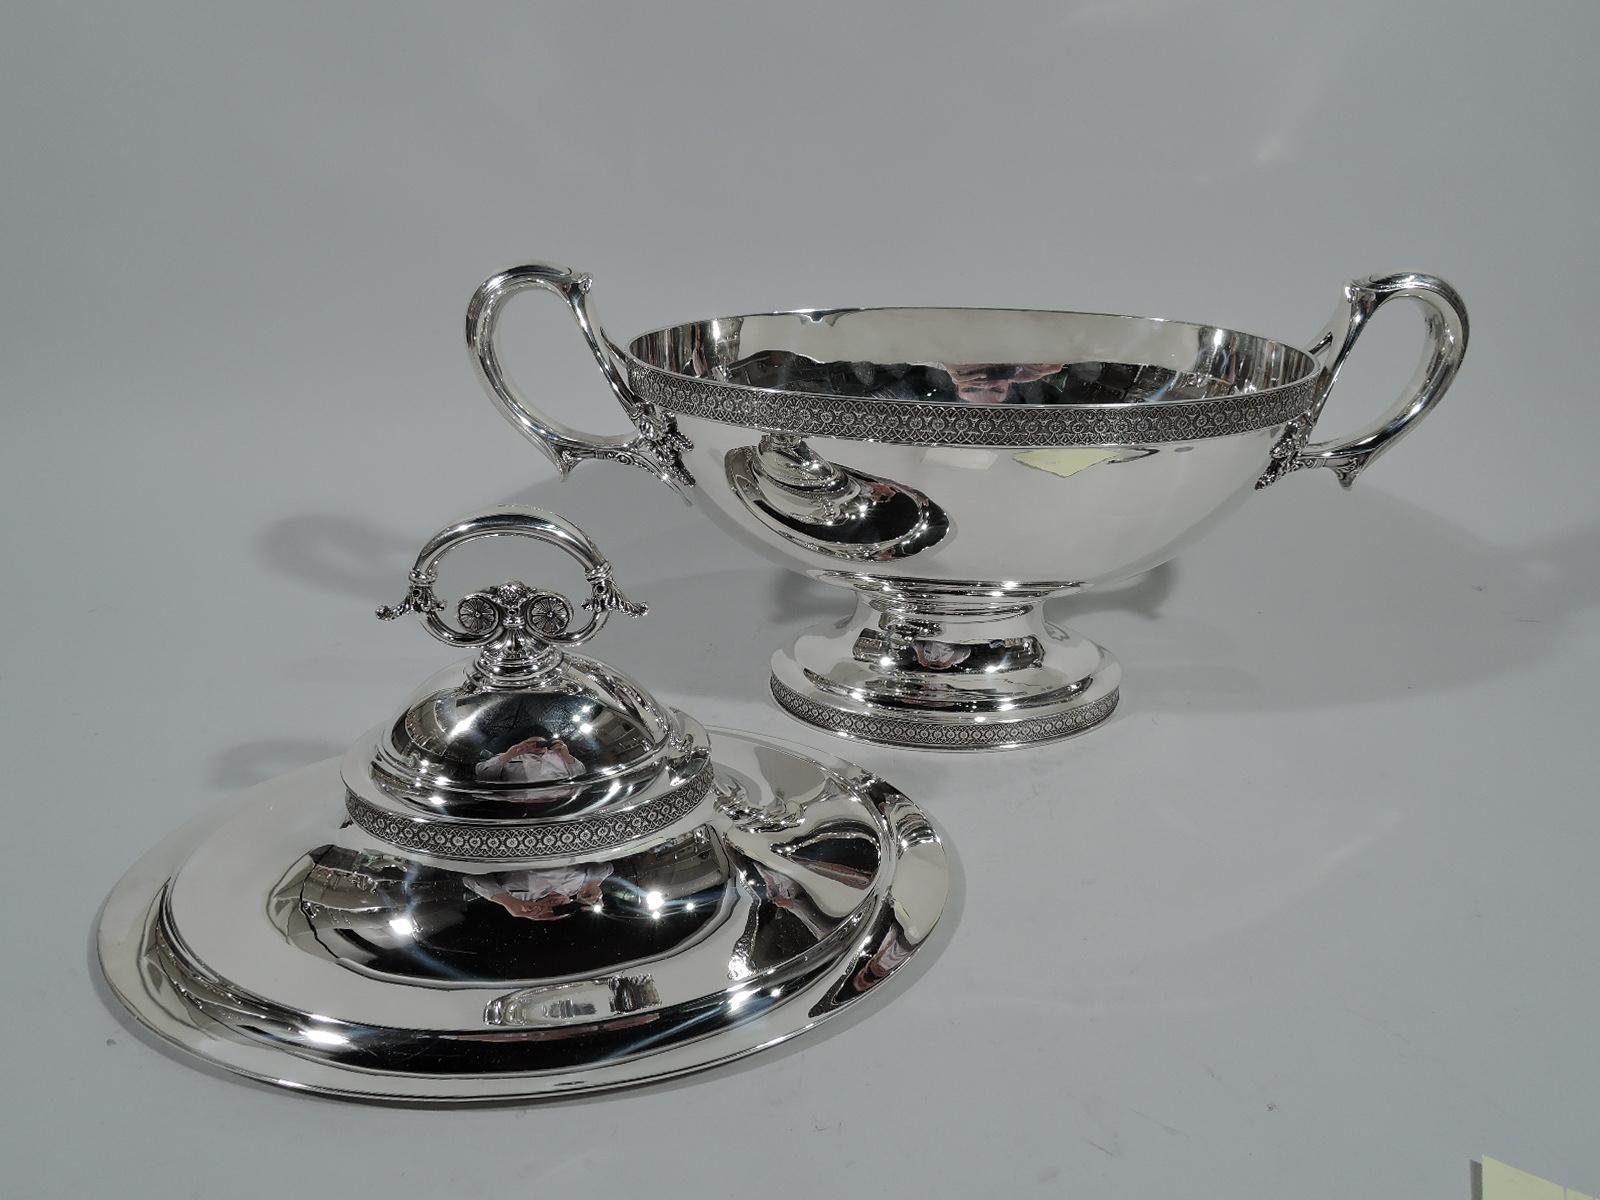 Stylish sterling silver tureen with stylized ornament. Made by Tiffany & Co. in New York. Curved and oval bowl on raised oval foot. Dynamic capped loop handles with split foliate mounts. Stepped and domed cover has leaf-capped and scrolled ring